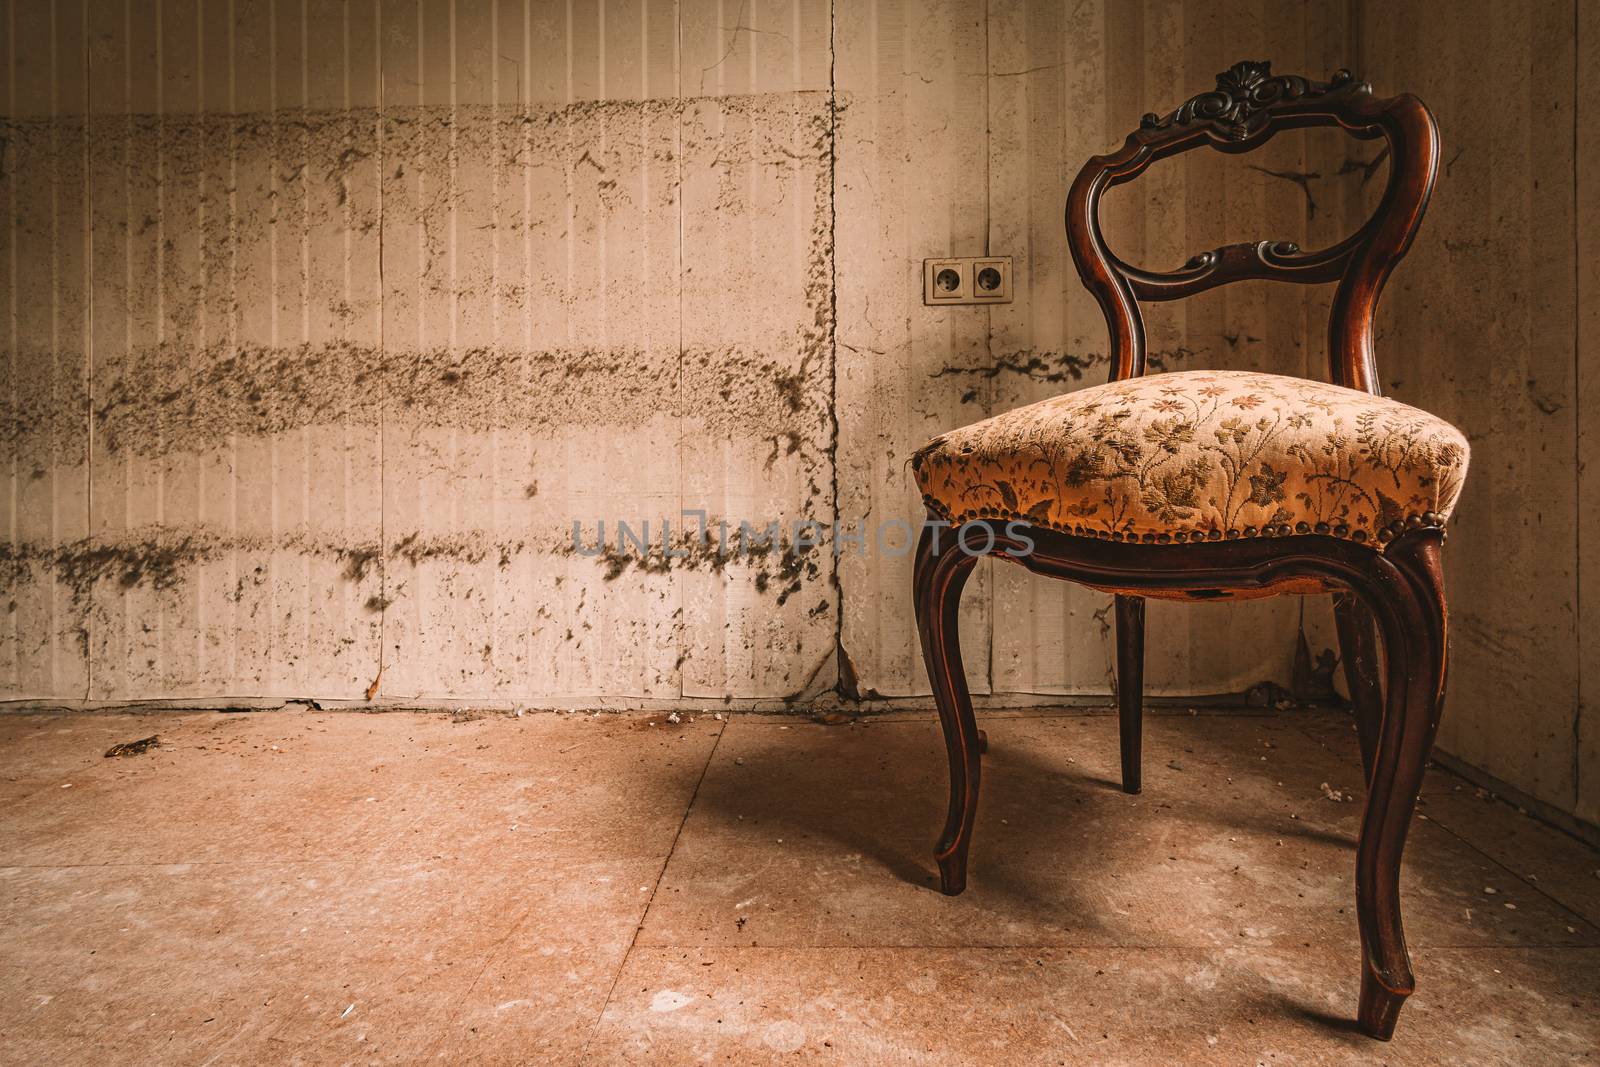 Urban Eploring in an old abandoned manor house, a Lost Place with antique furniture and wonderful architecture